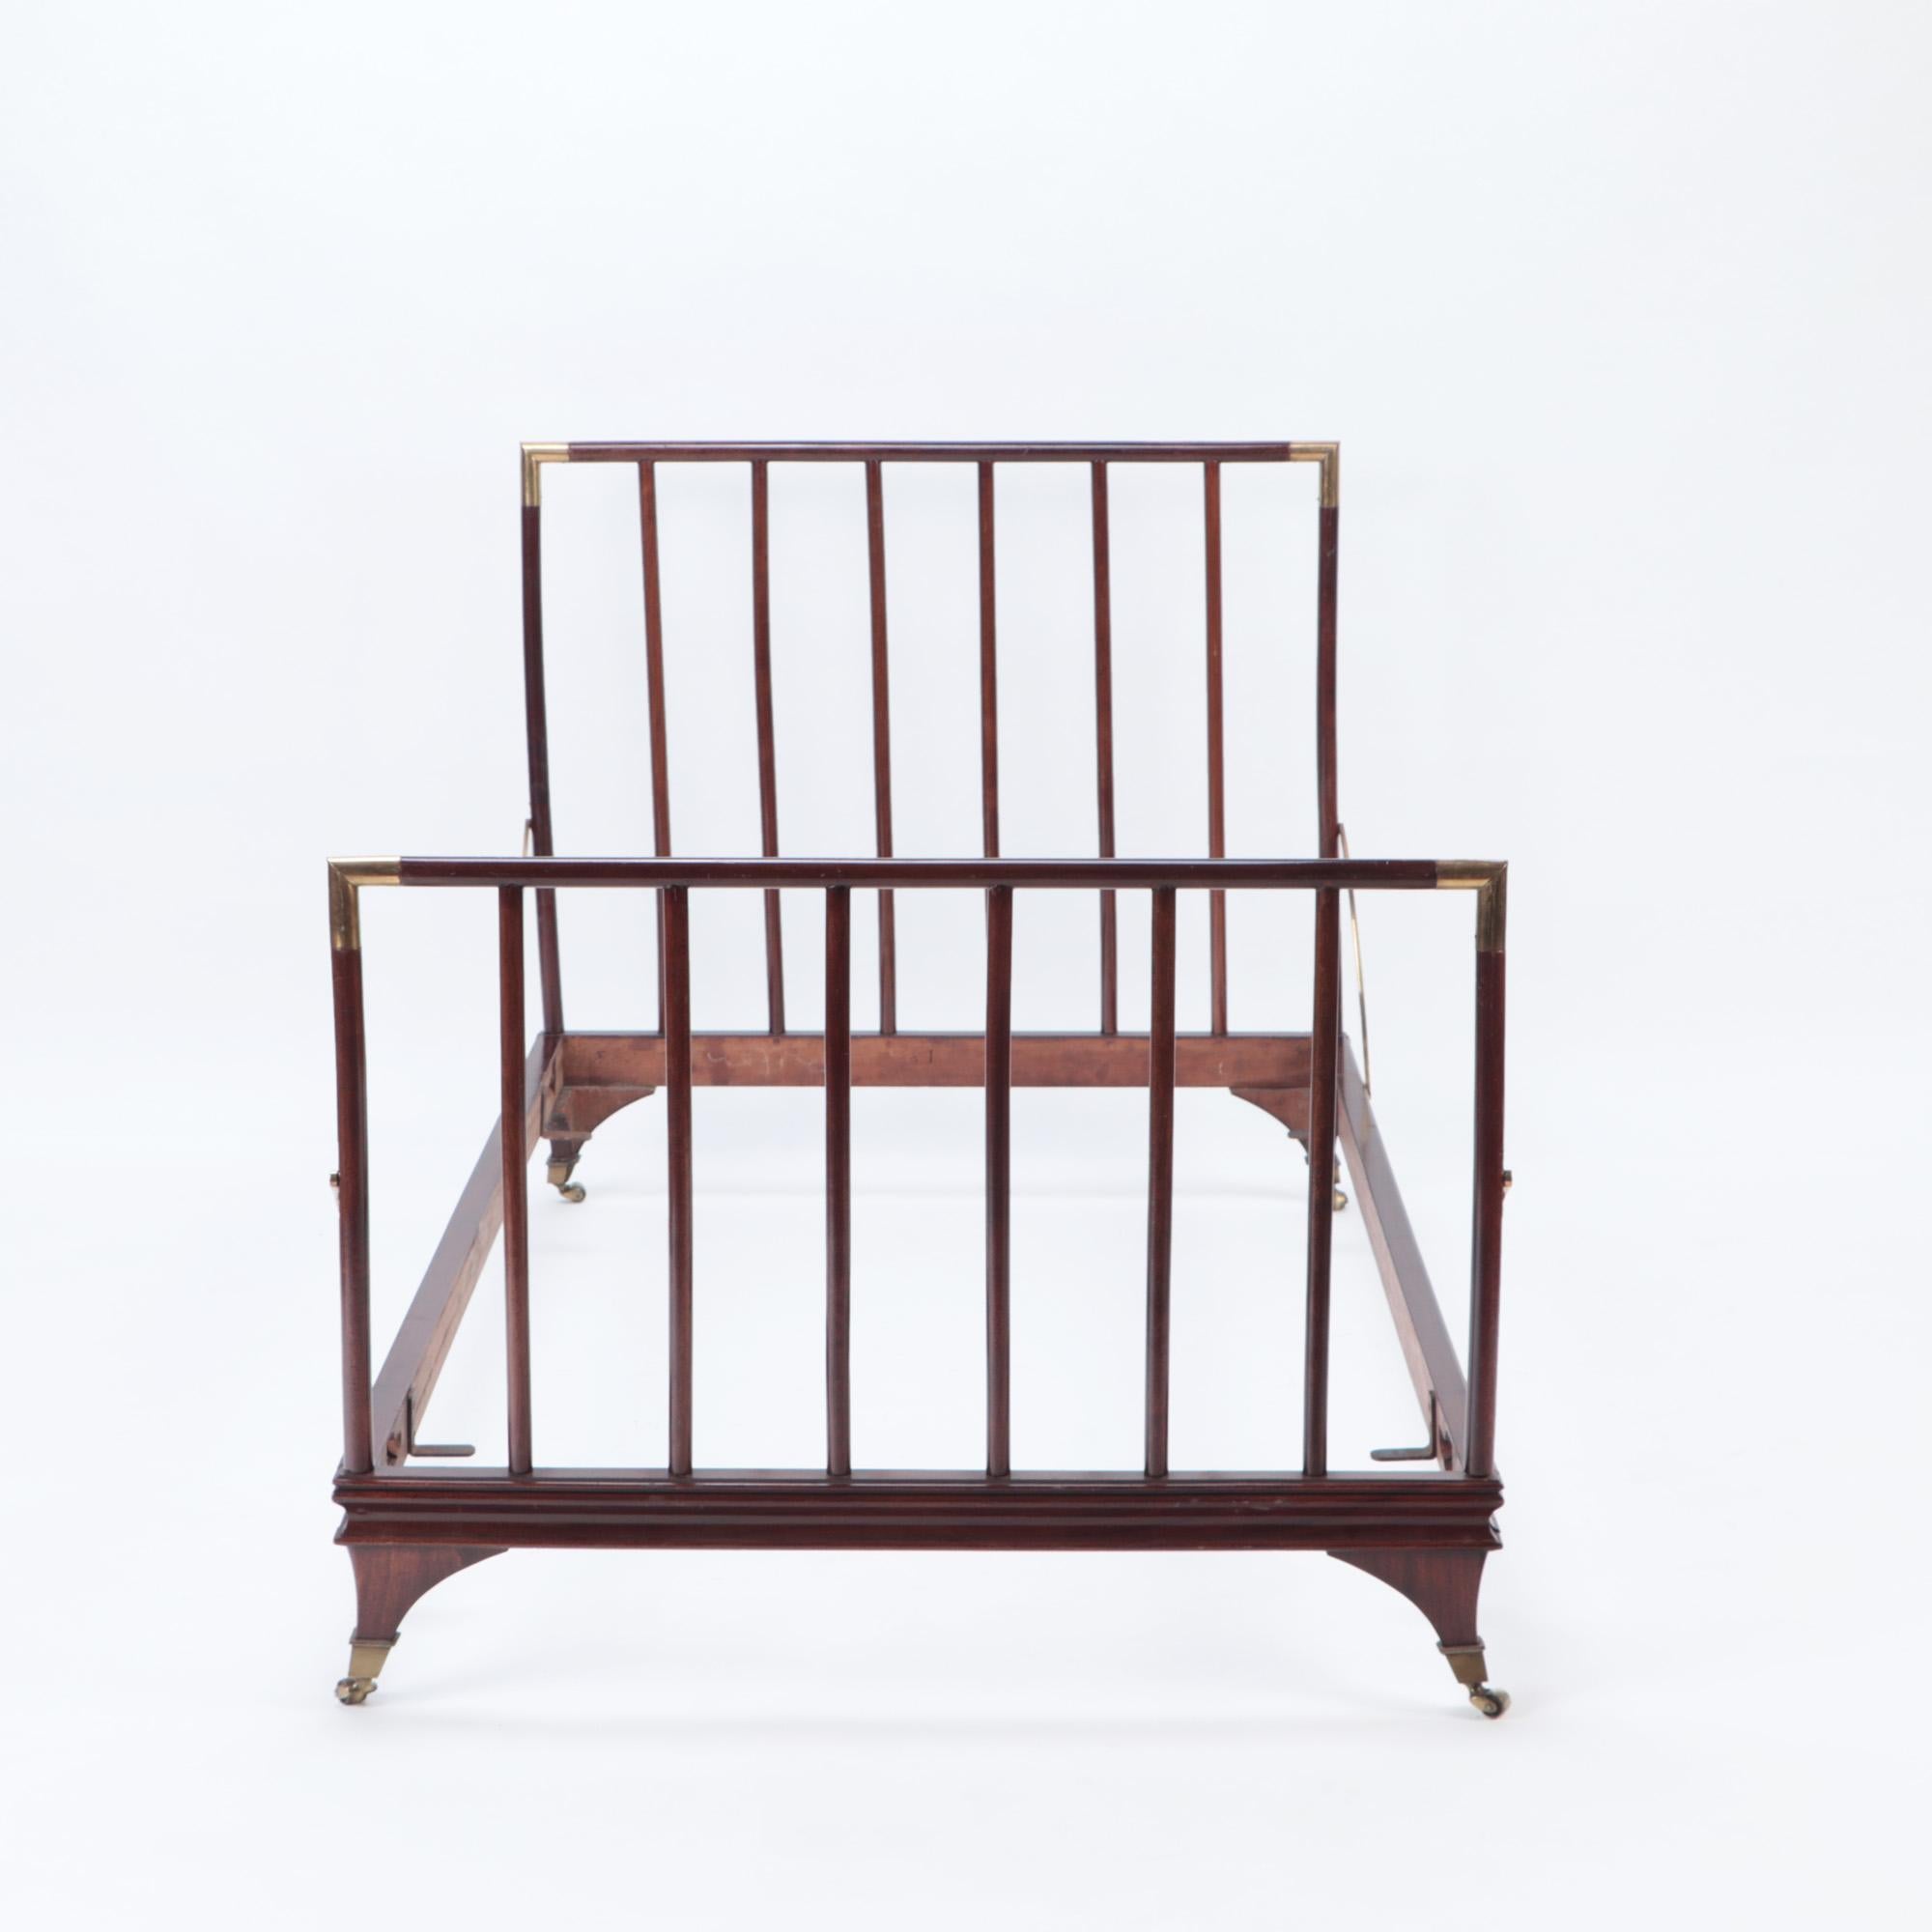 An English brass mounted mahogany campaign bed, circa 1900. One of a pair. Identical bed available as well.
Interior dimensions: 38.75